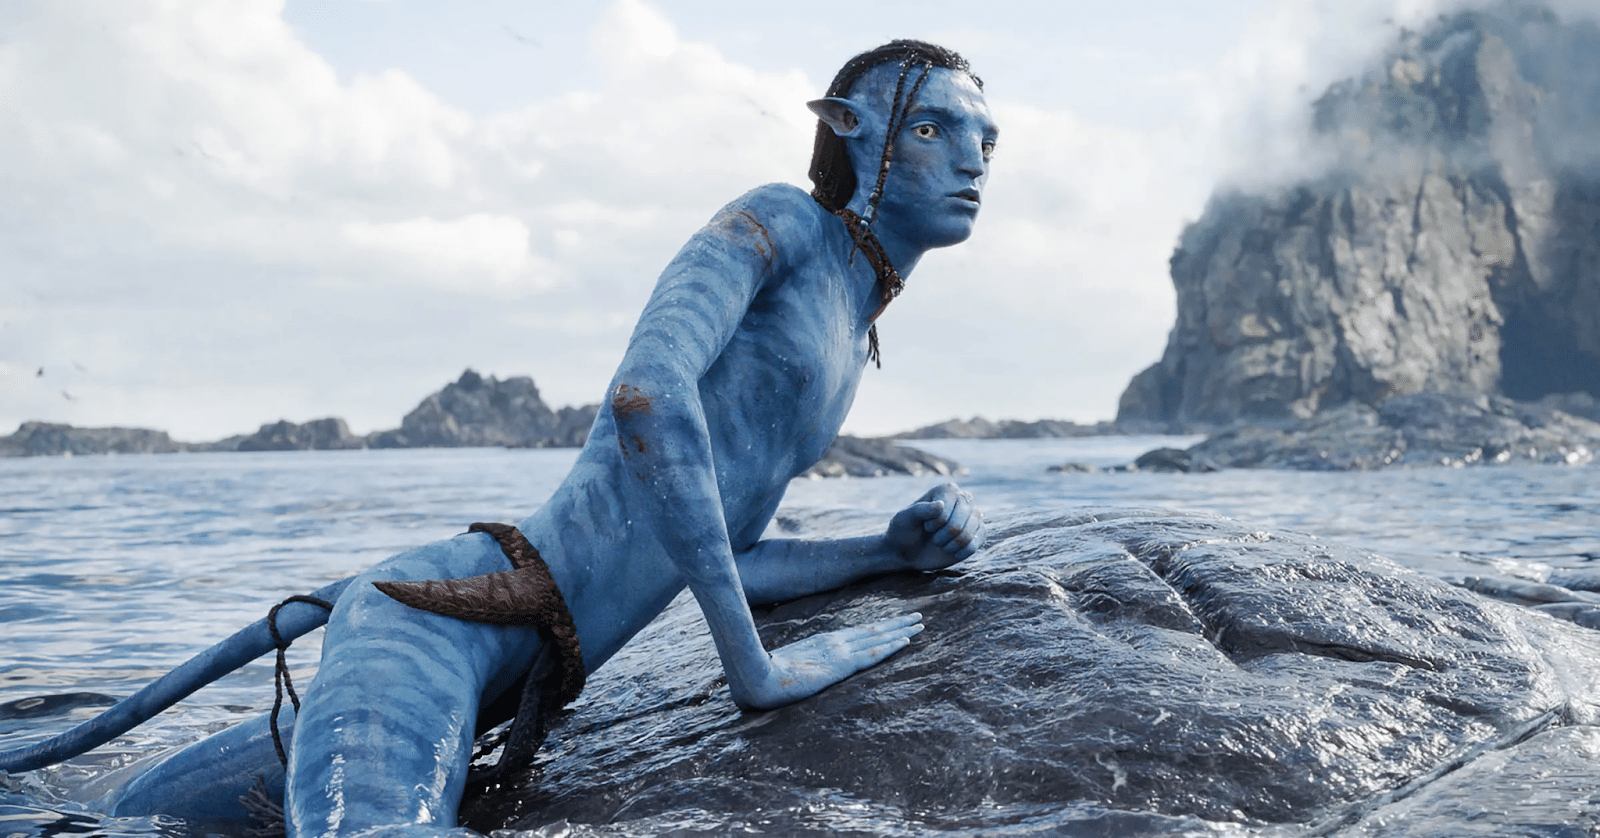 Where to stream Avatar: The Way of Water